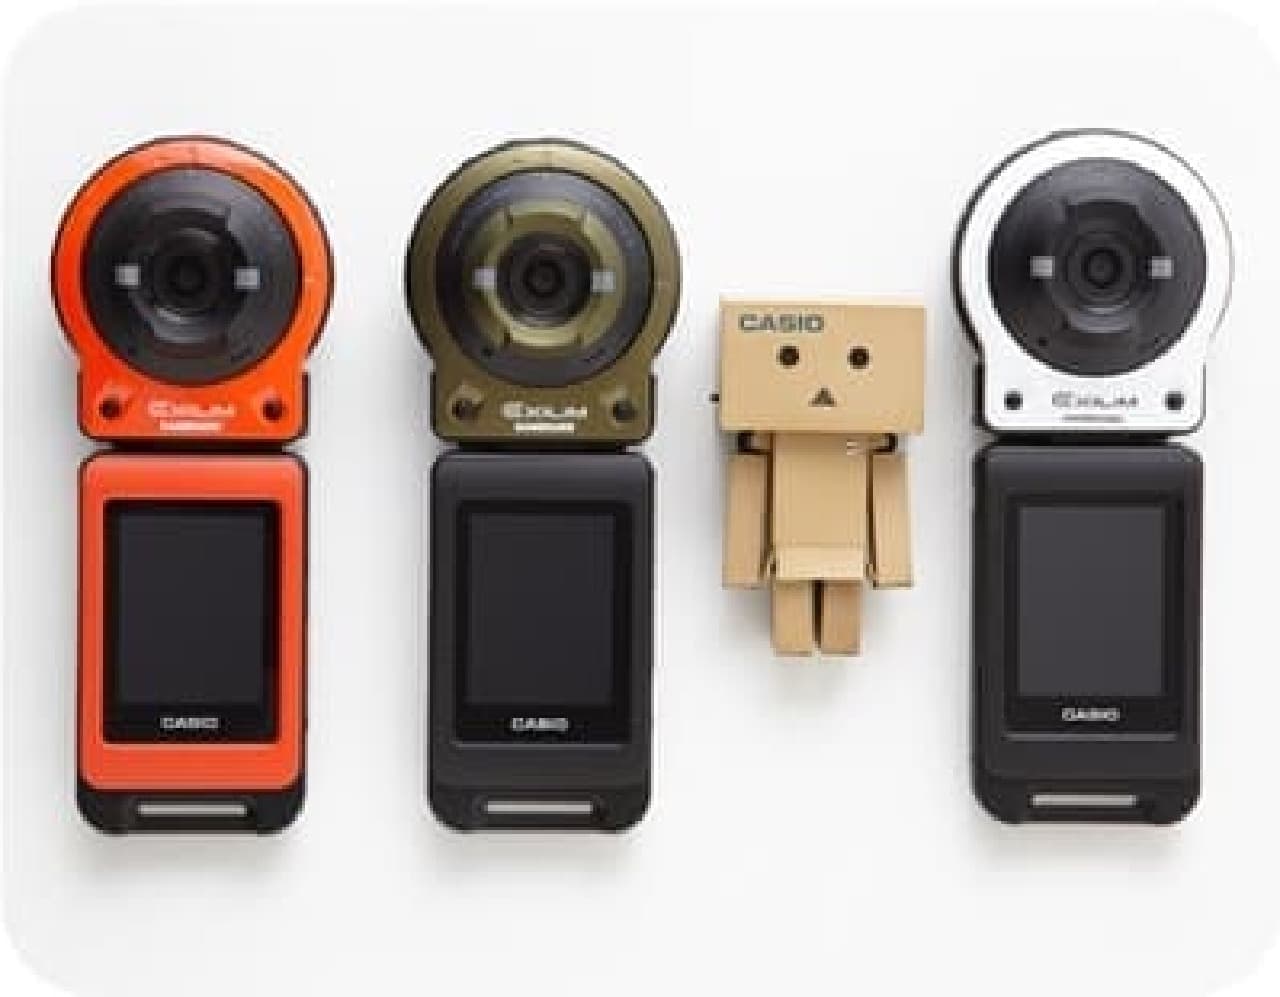 Danbo finally collaborates with a digital camera!